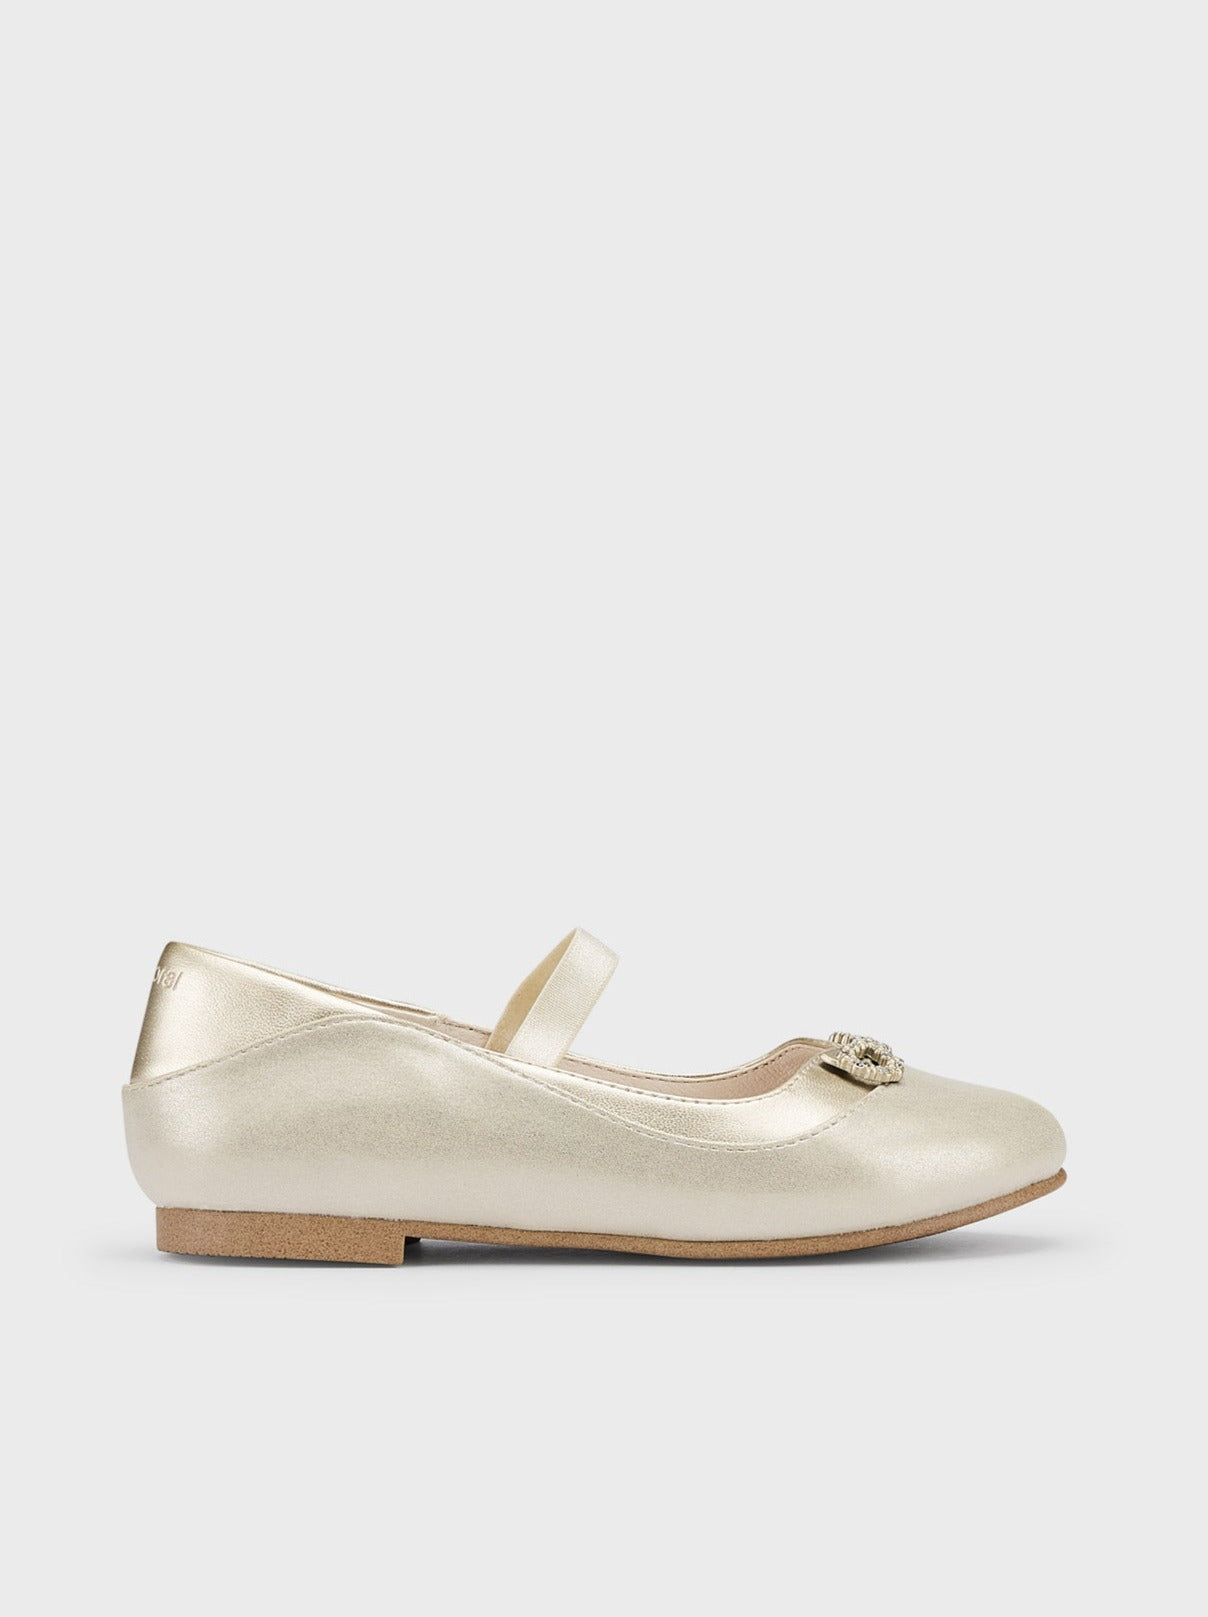 Mayoral Formal Flats w/Bow Gold_43431-071